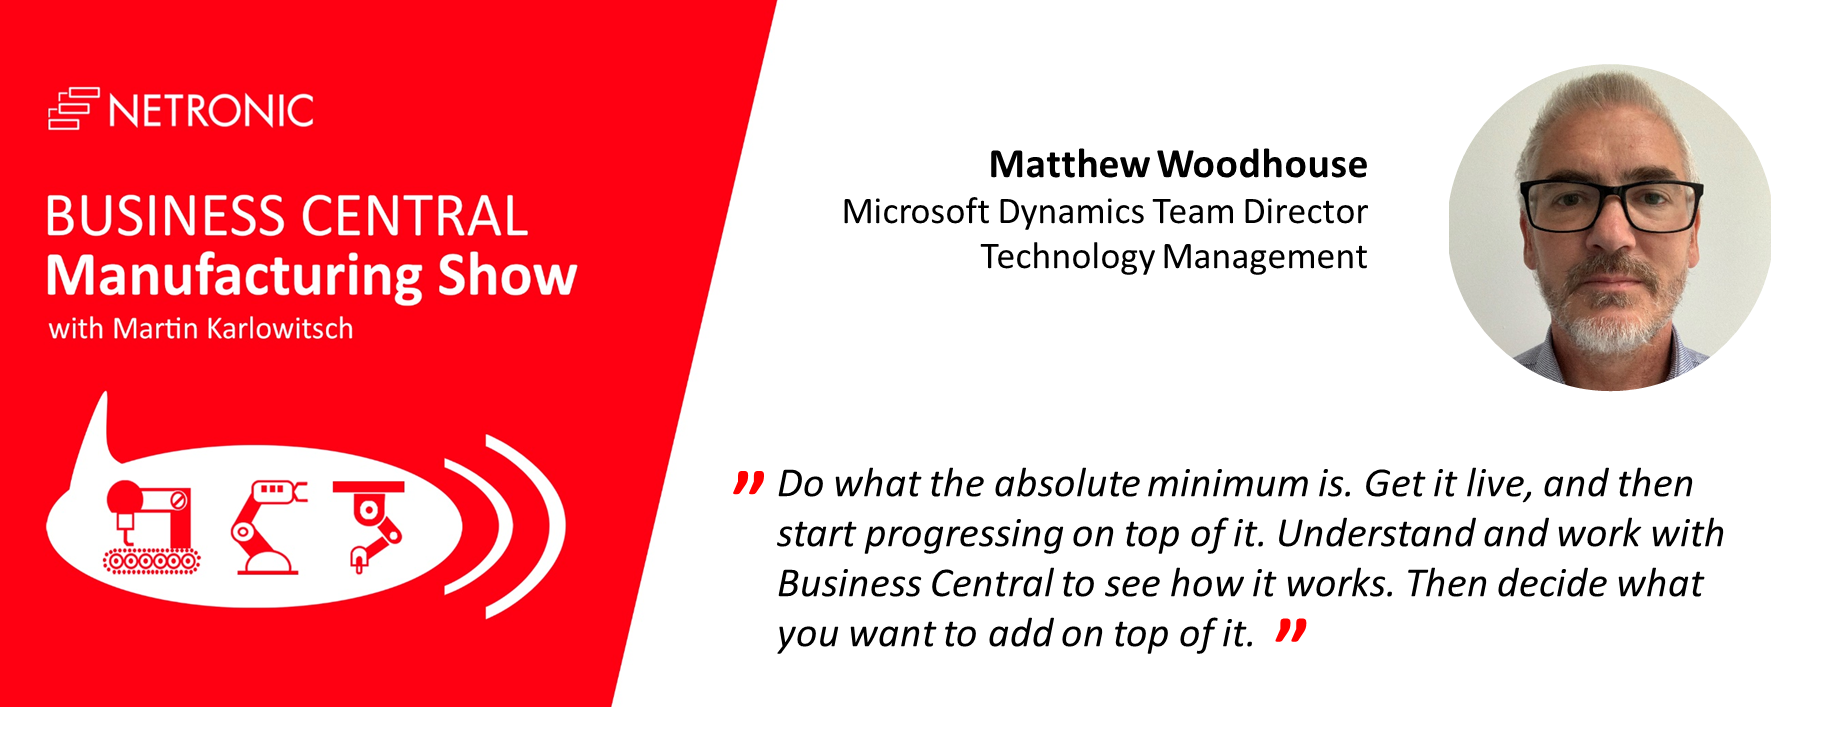 Business Central Manufacturing Show - Matt Woodhouse